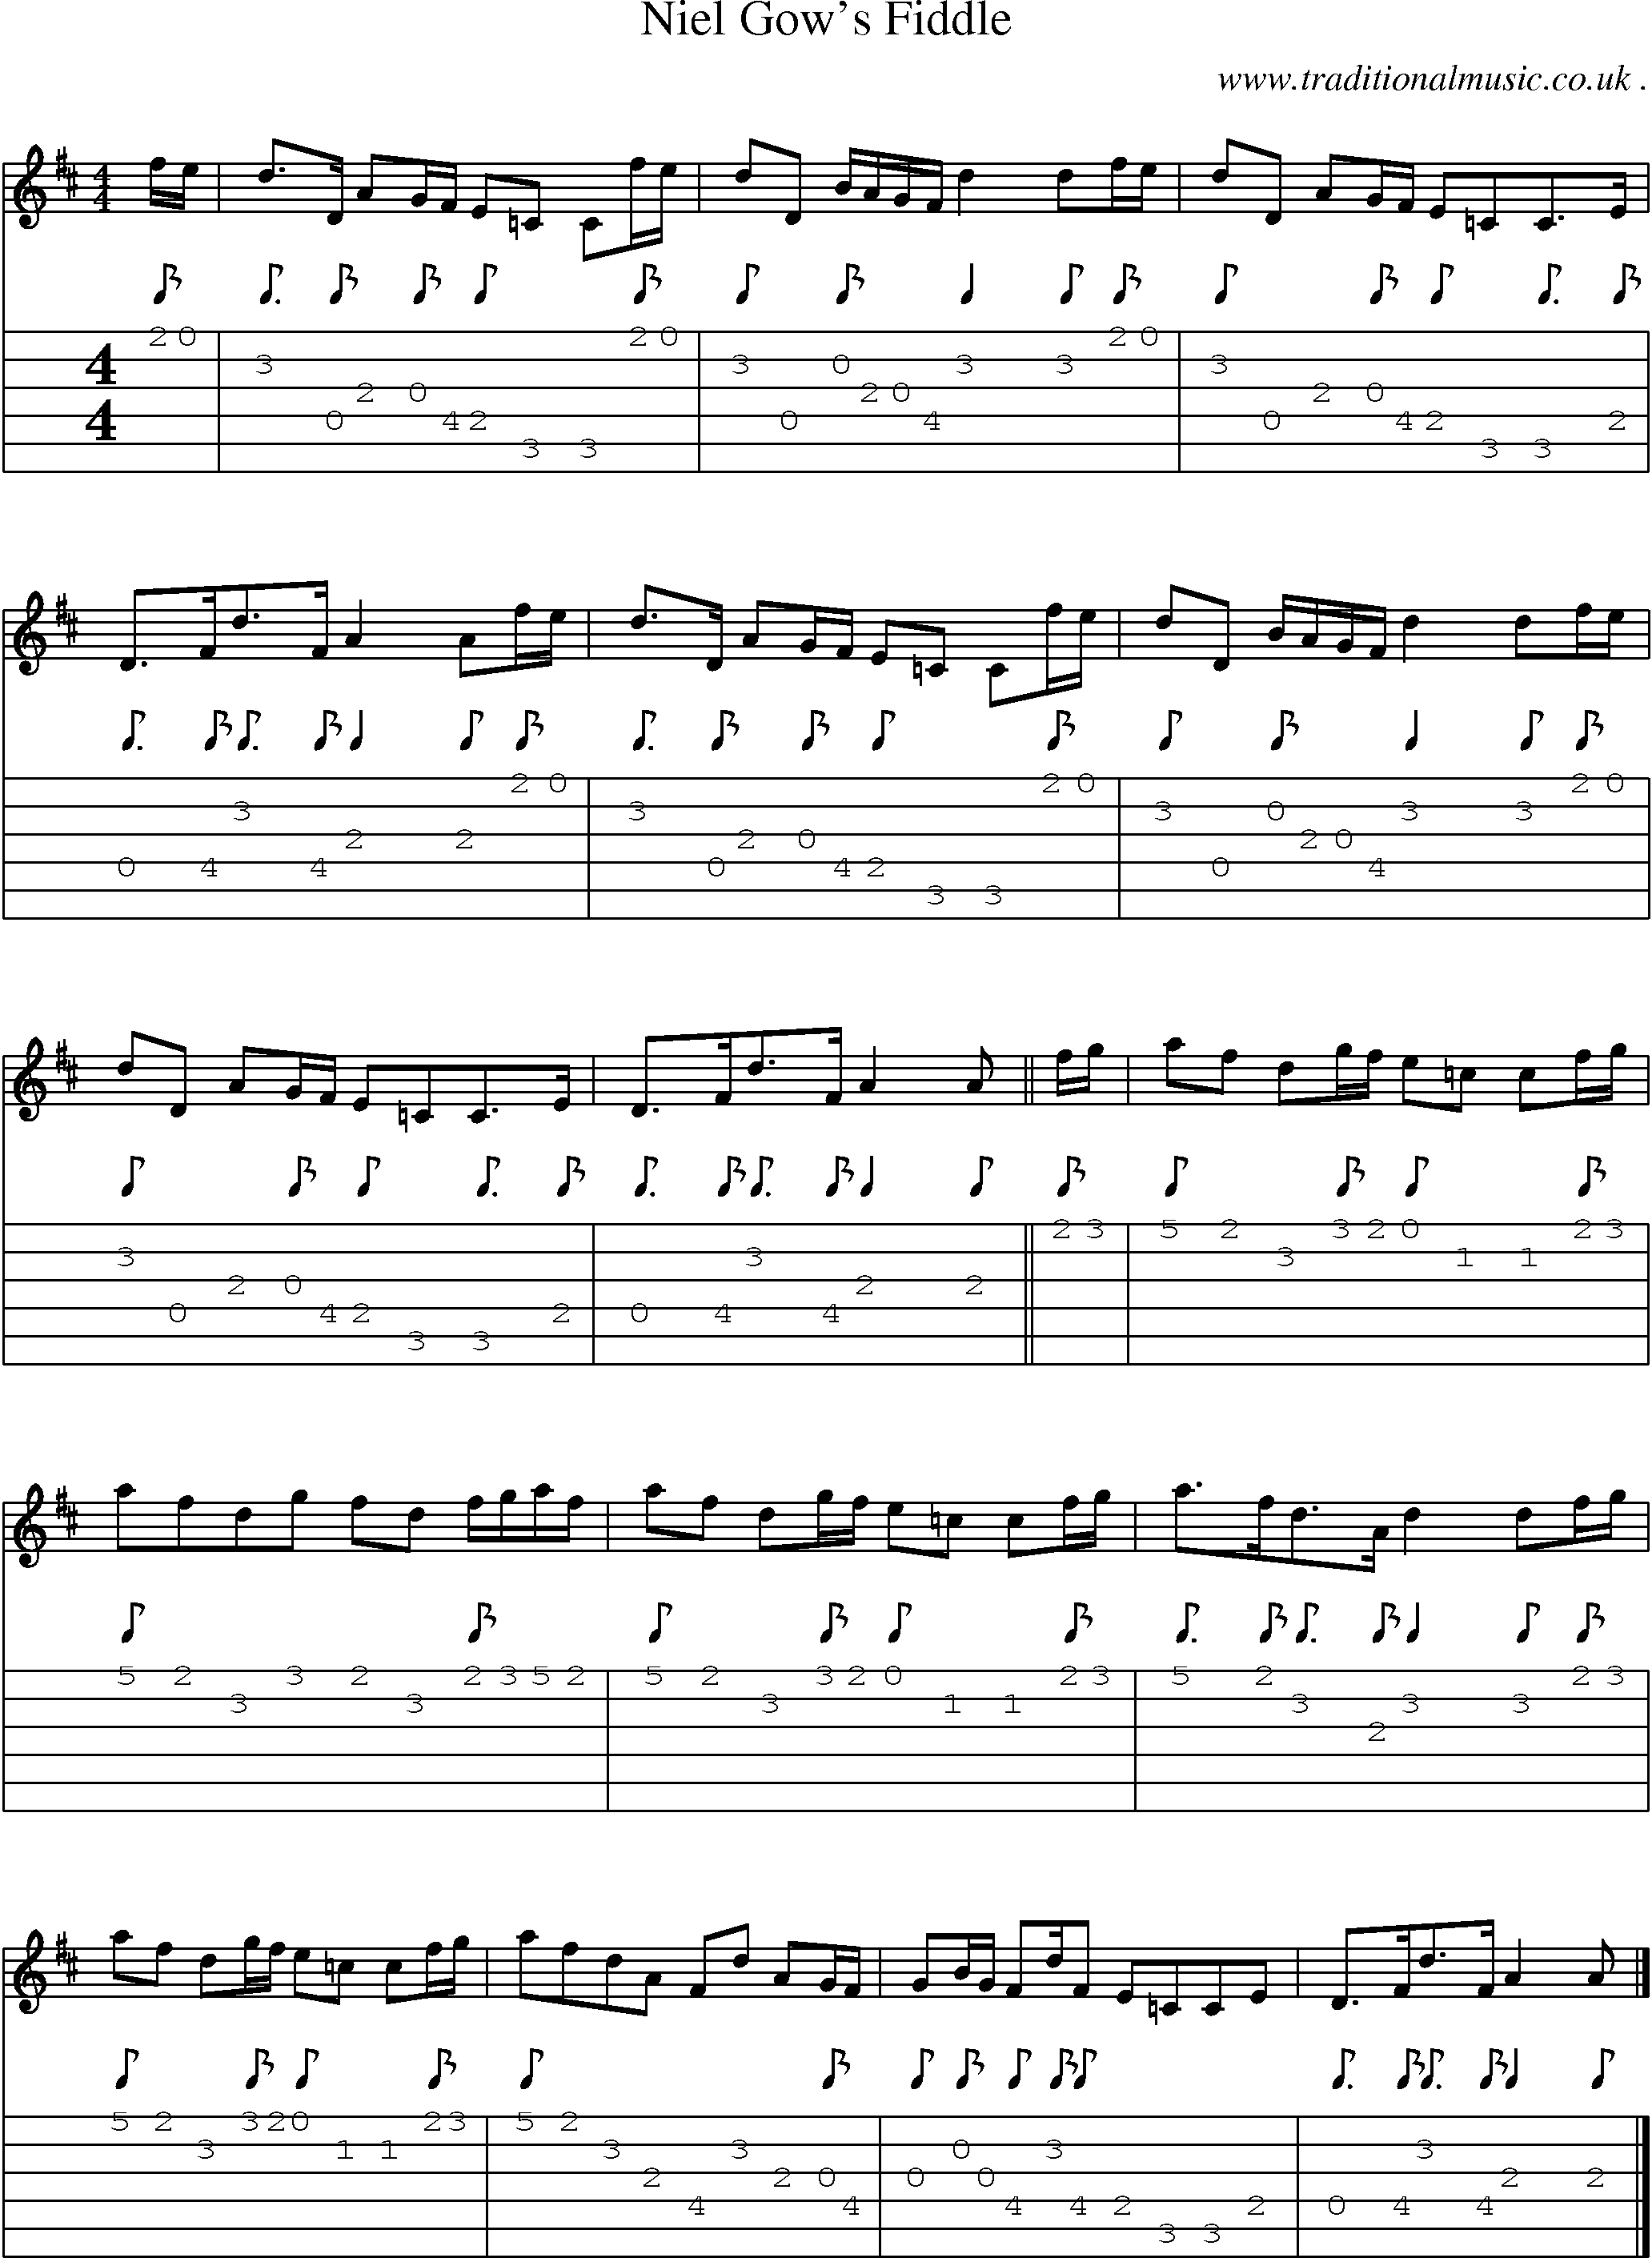 Sheet-music  score, Chords and Guitar Tabs for Niel Gows Fiddle